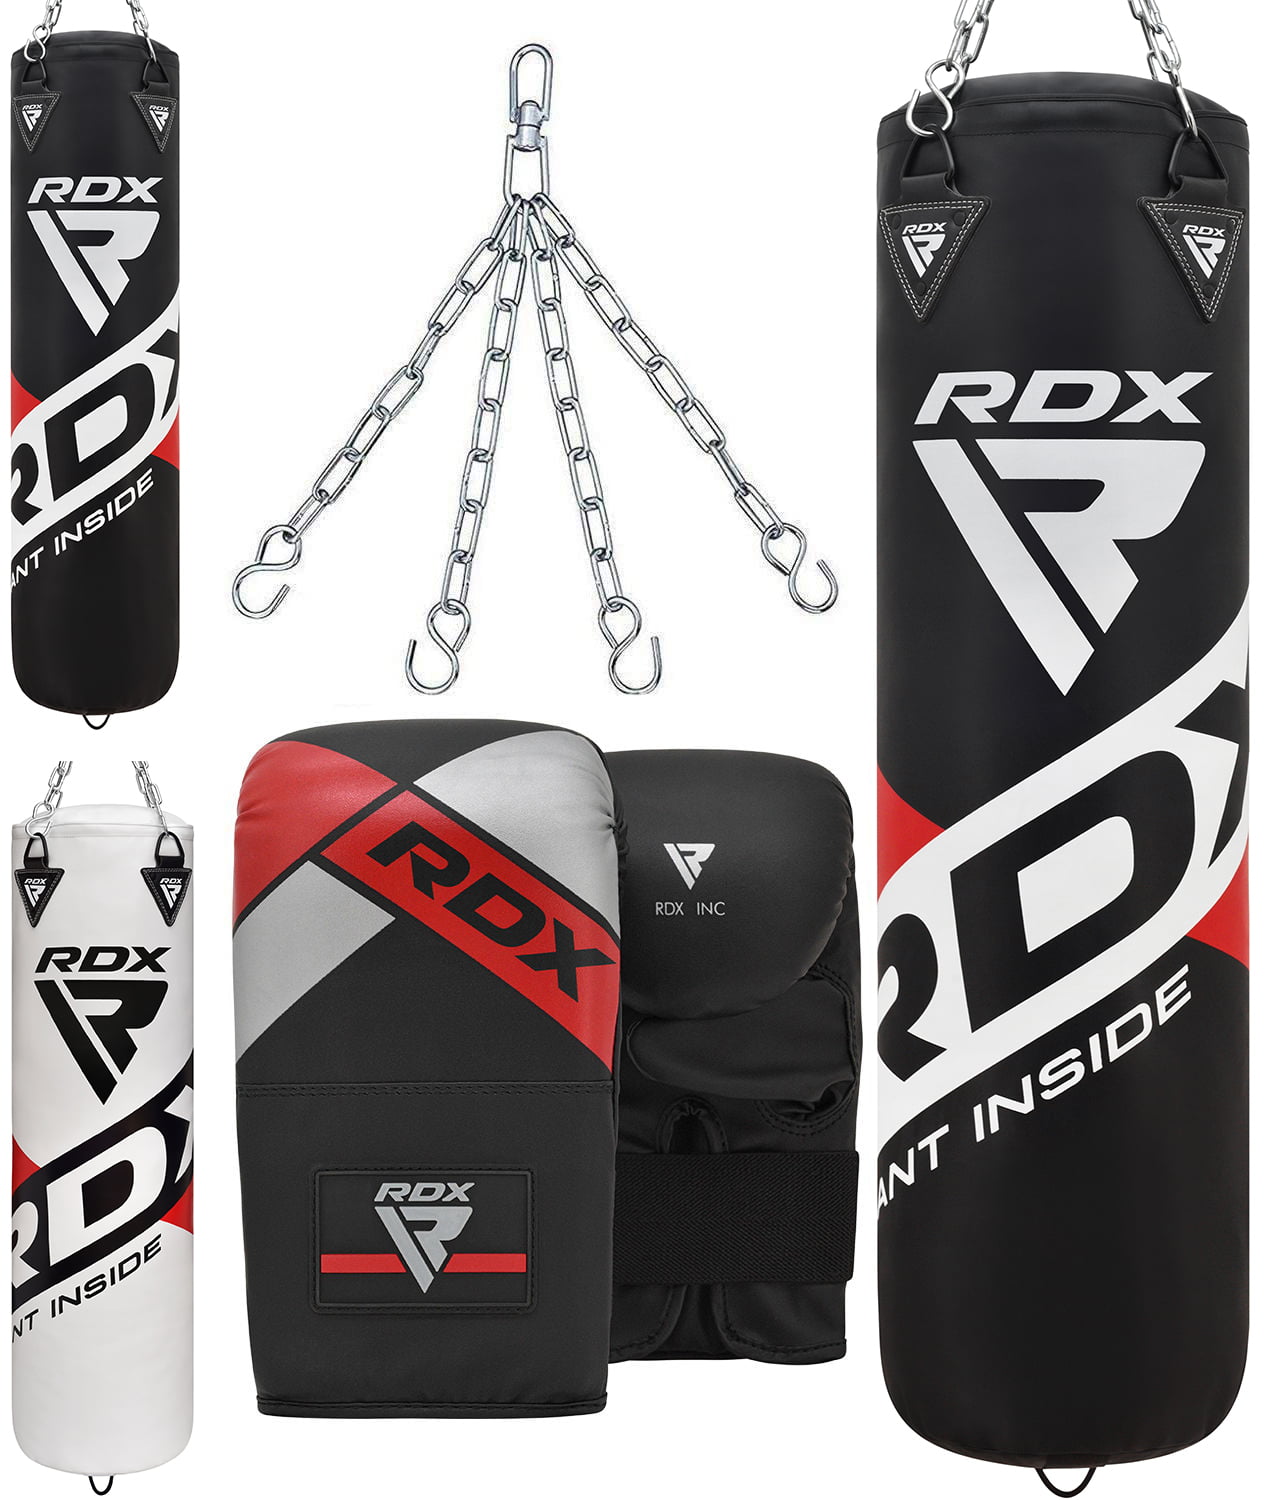 RDX Leather Punch Bag Set Filled Boxing Gloves Chain MMA Training Kickboxing OS 